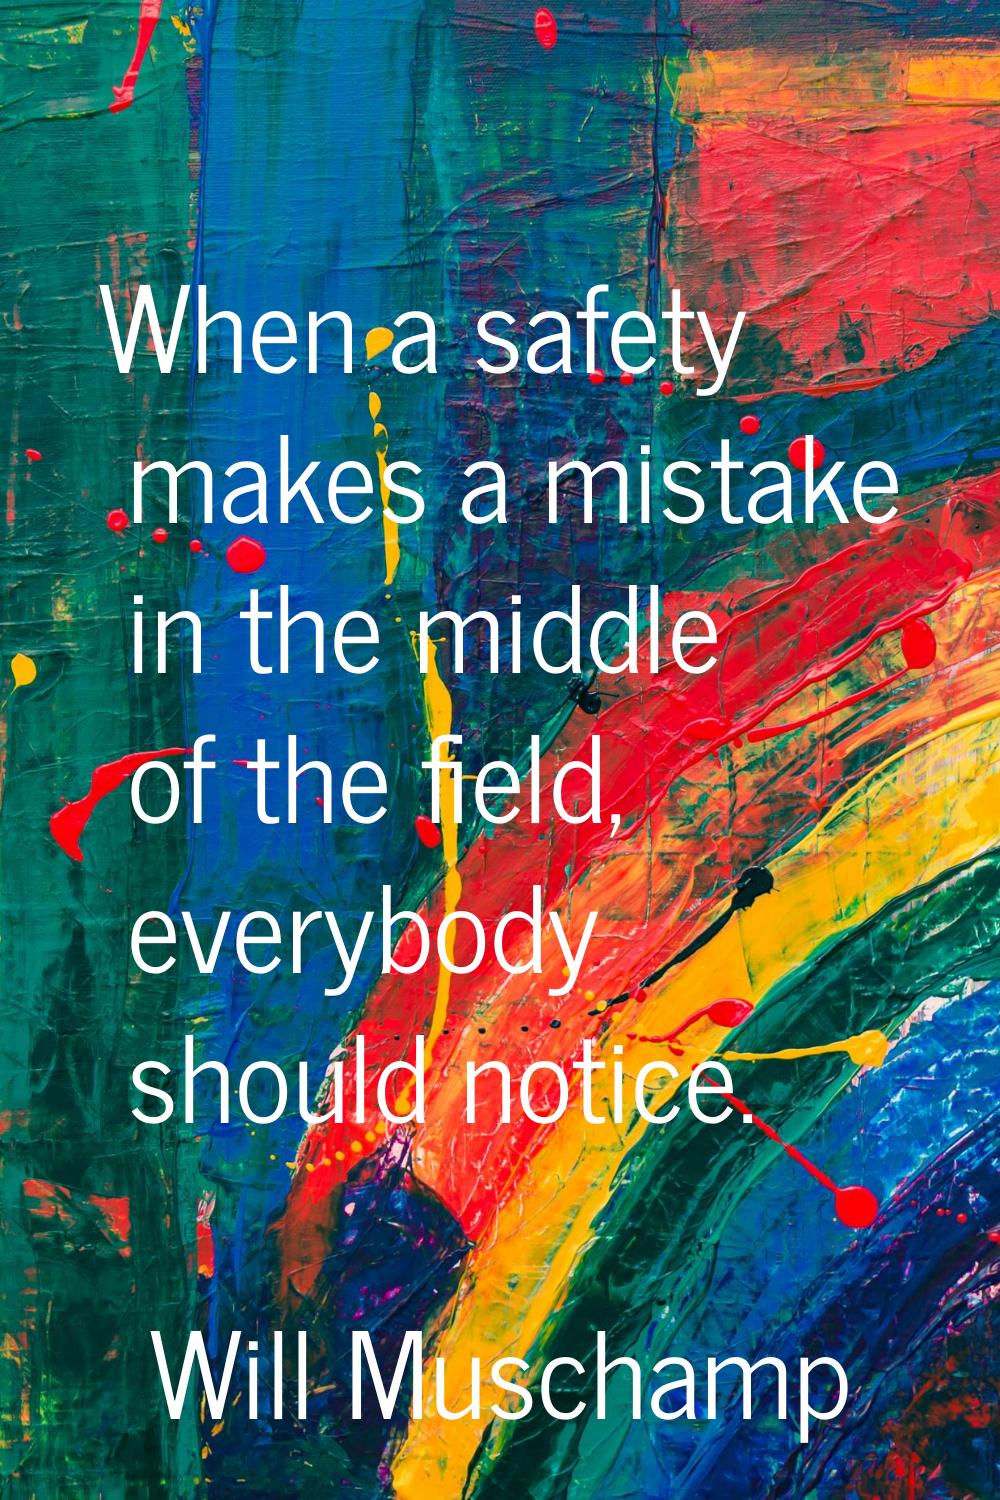 When a safety makes a mistake in the middle of the field, everybody should notice.